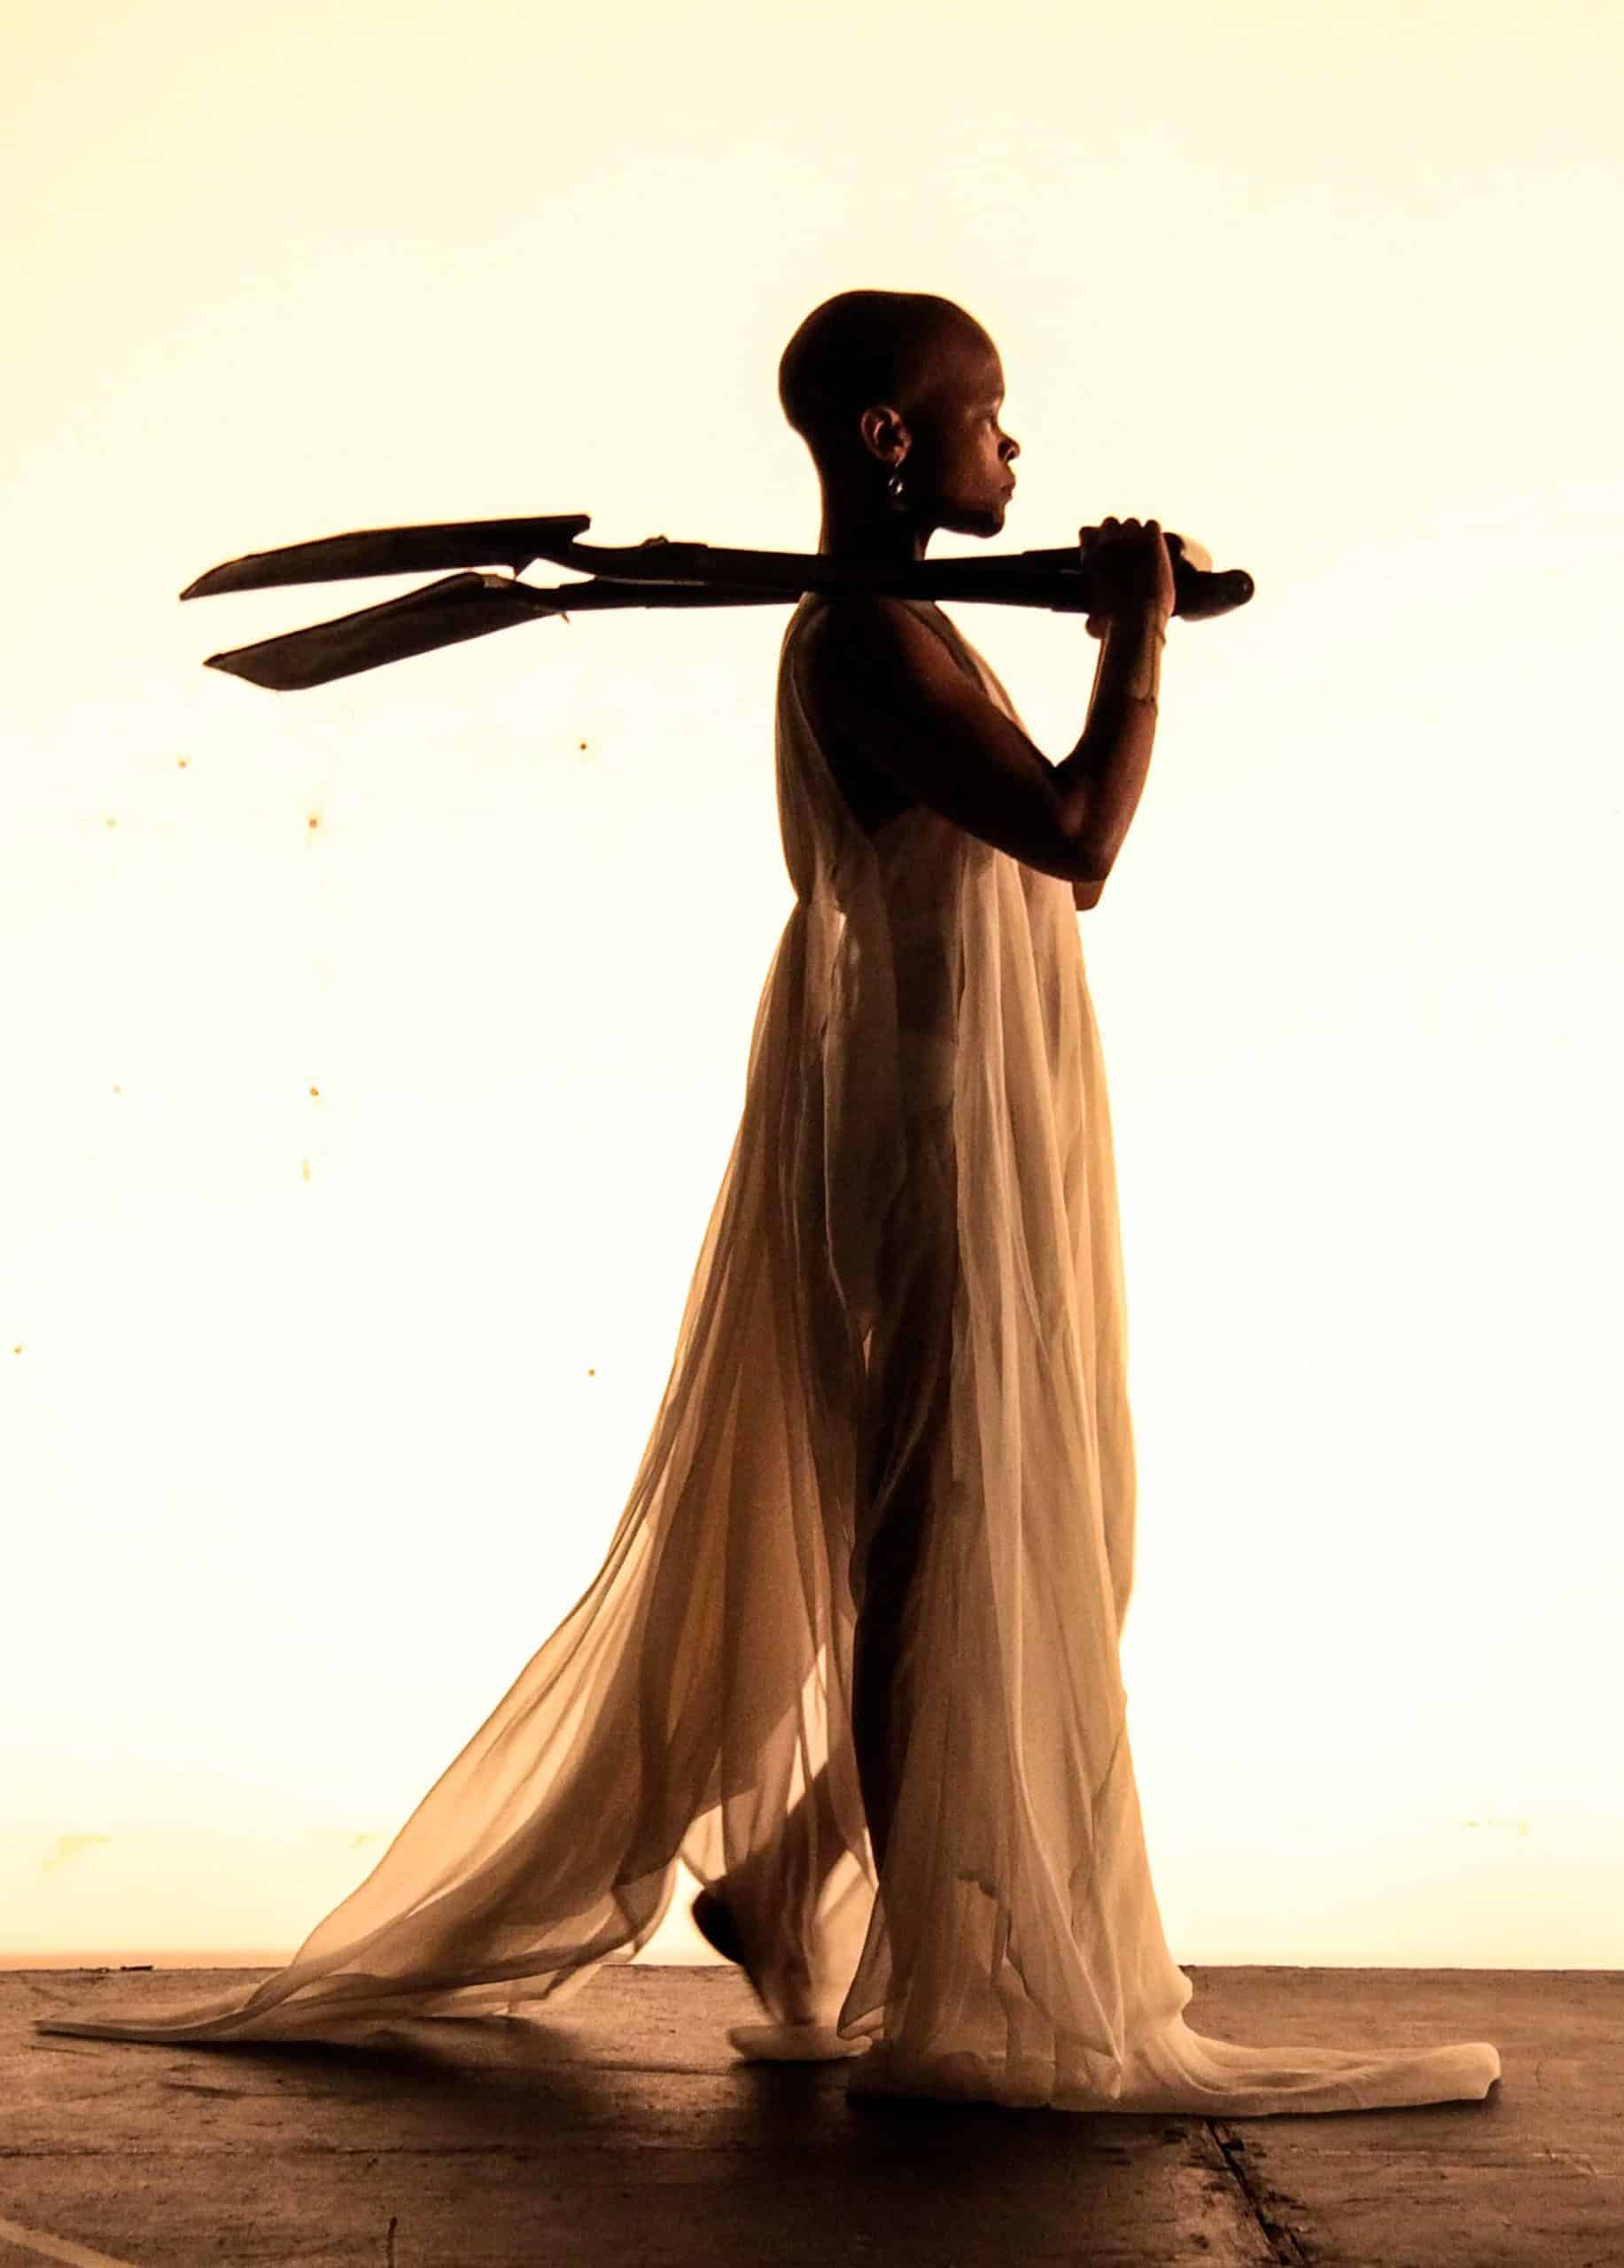 Awardwinning South African choreographer Dada Masilo performs the lead role in her re-imagined Giselle, which she brought to Williams College on tour.